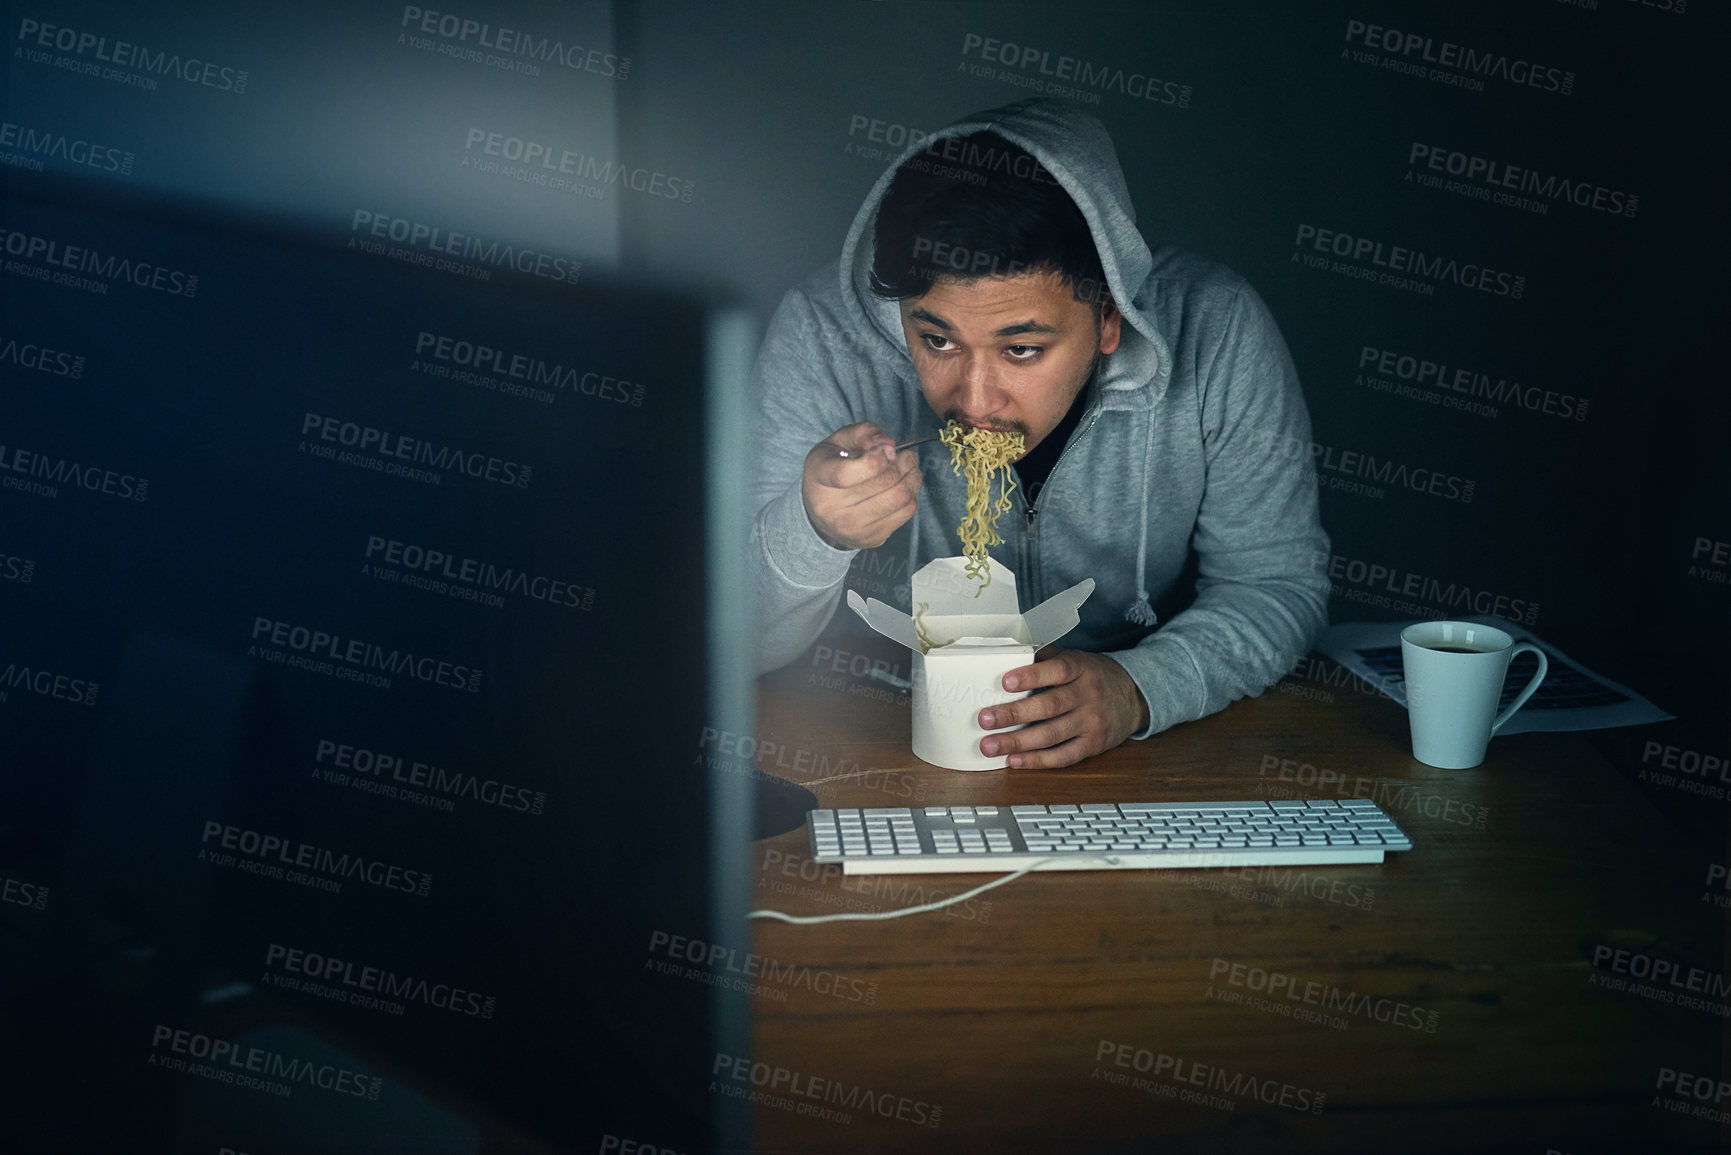 Buy stock photo Shot of a young man eating takeaway while working at his computer late in the evening